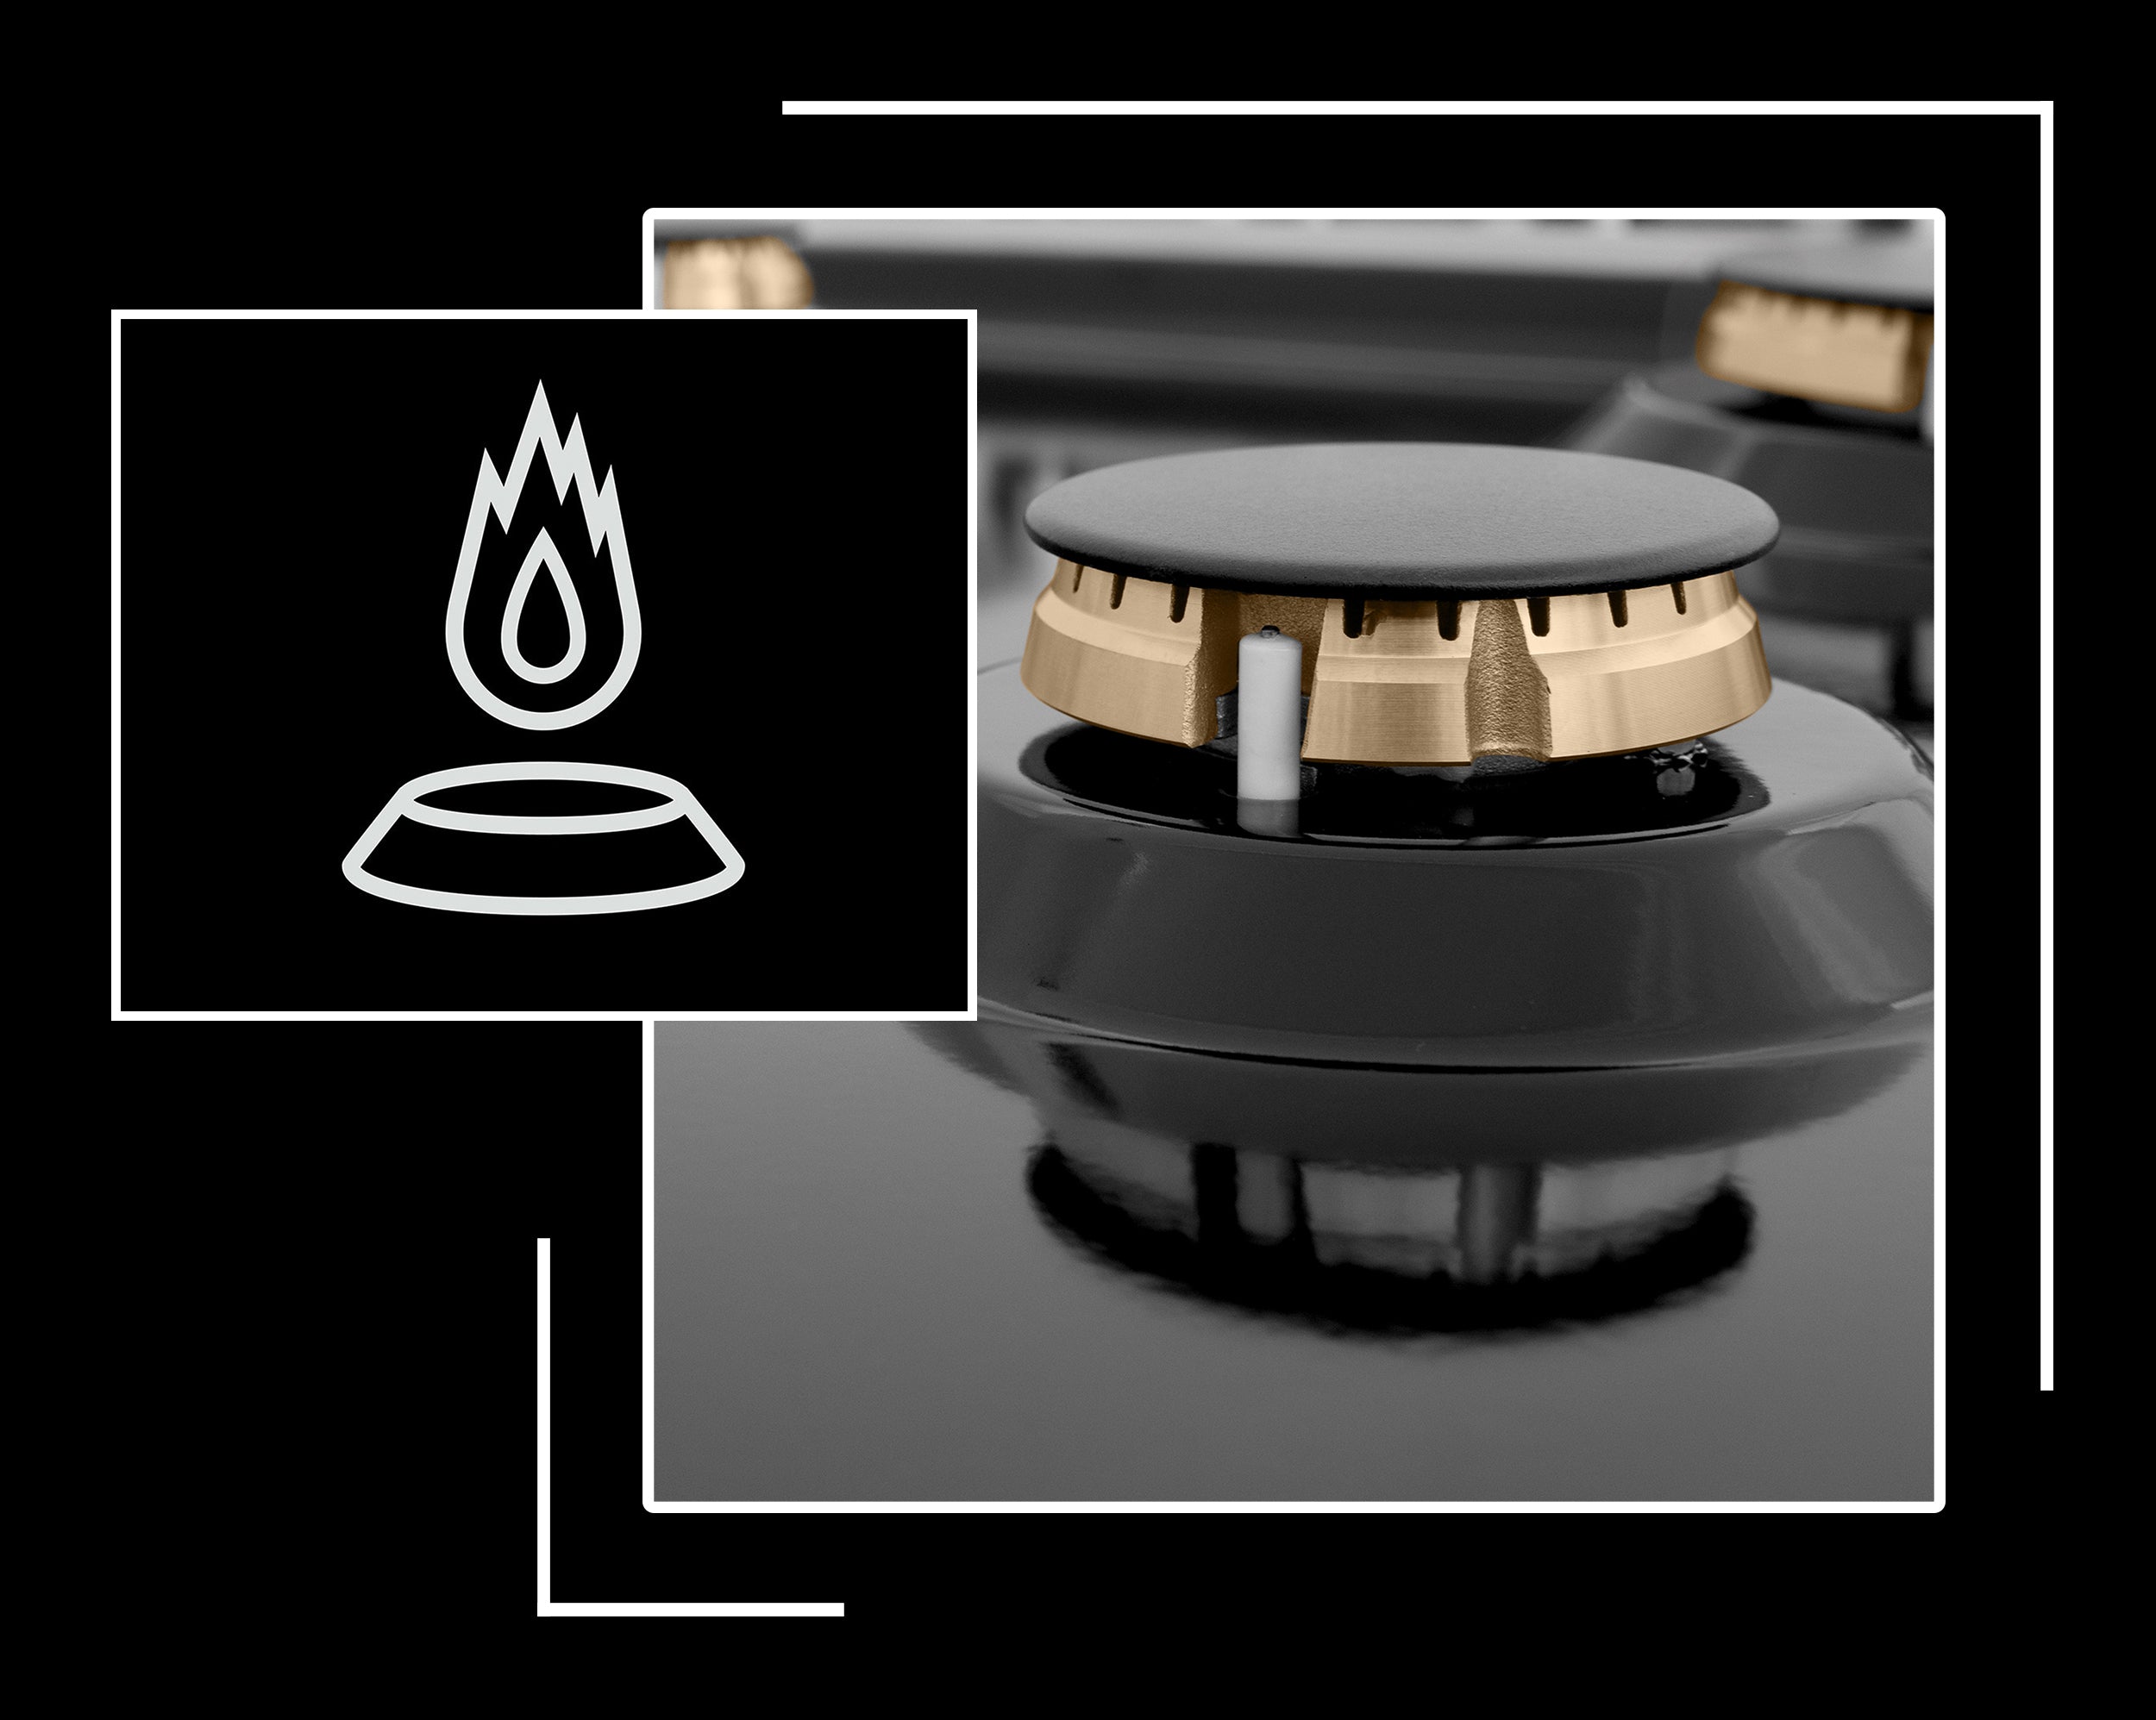 Icon and image representing Italian-made burners